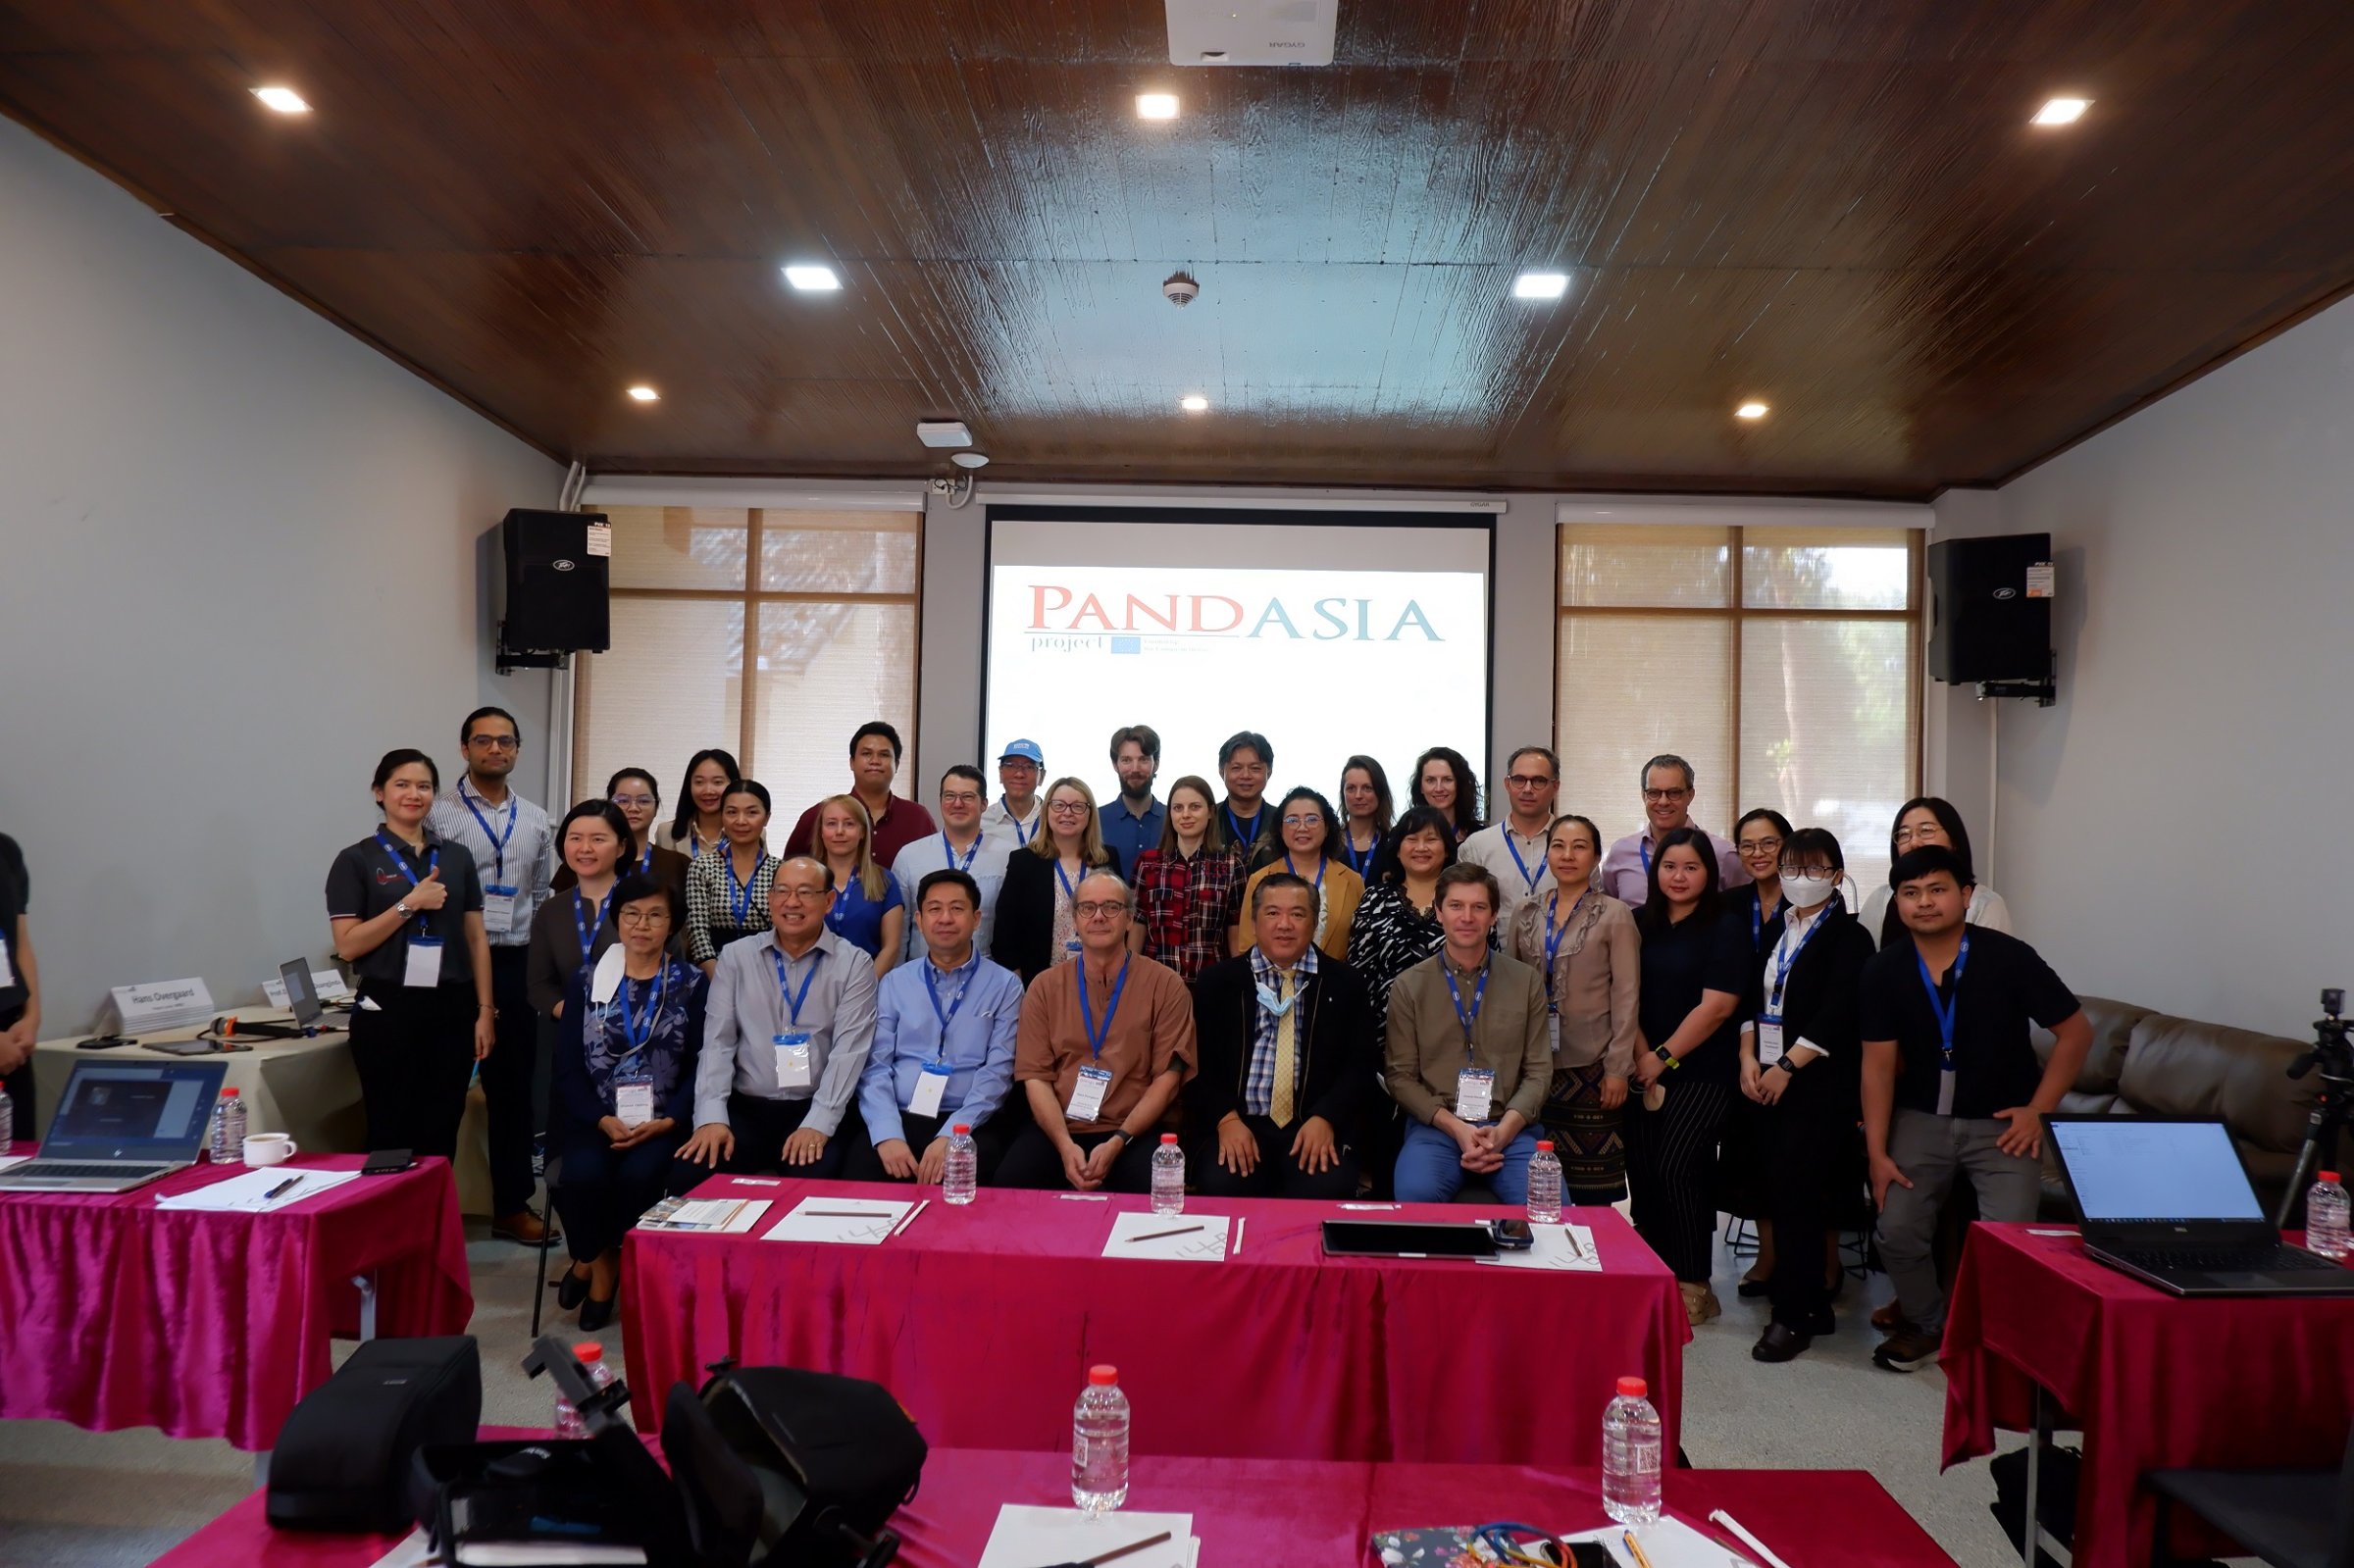 The PANDASIA project had a kick-off meeting in Thailand now in February. Photo: PANDASIA